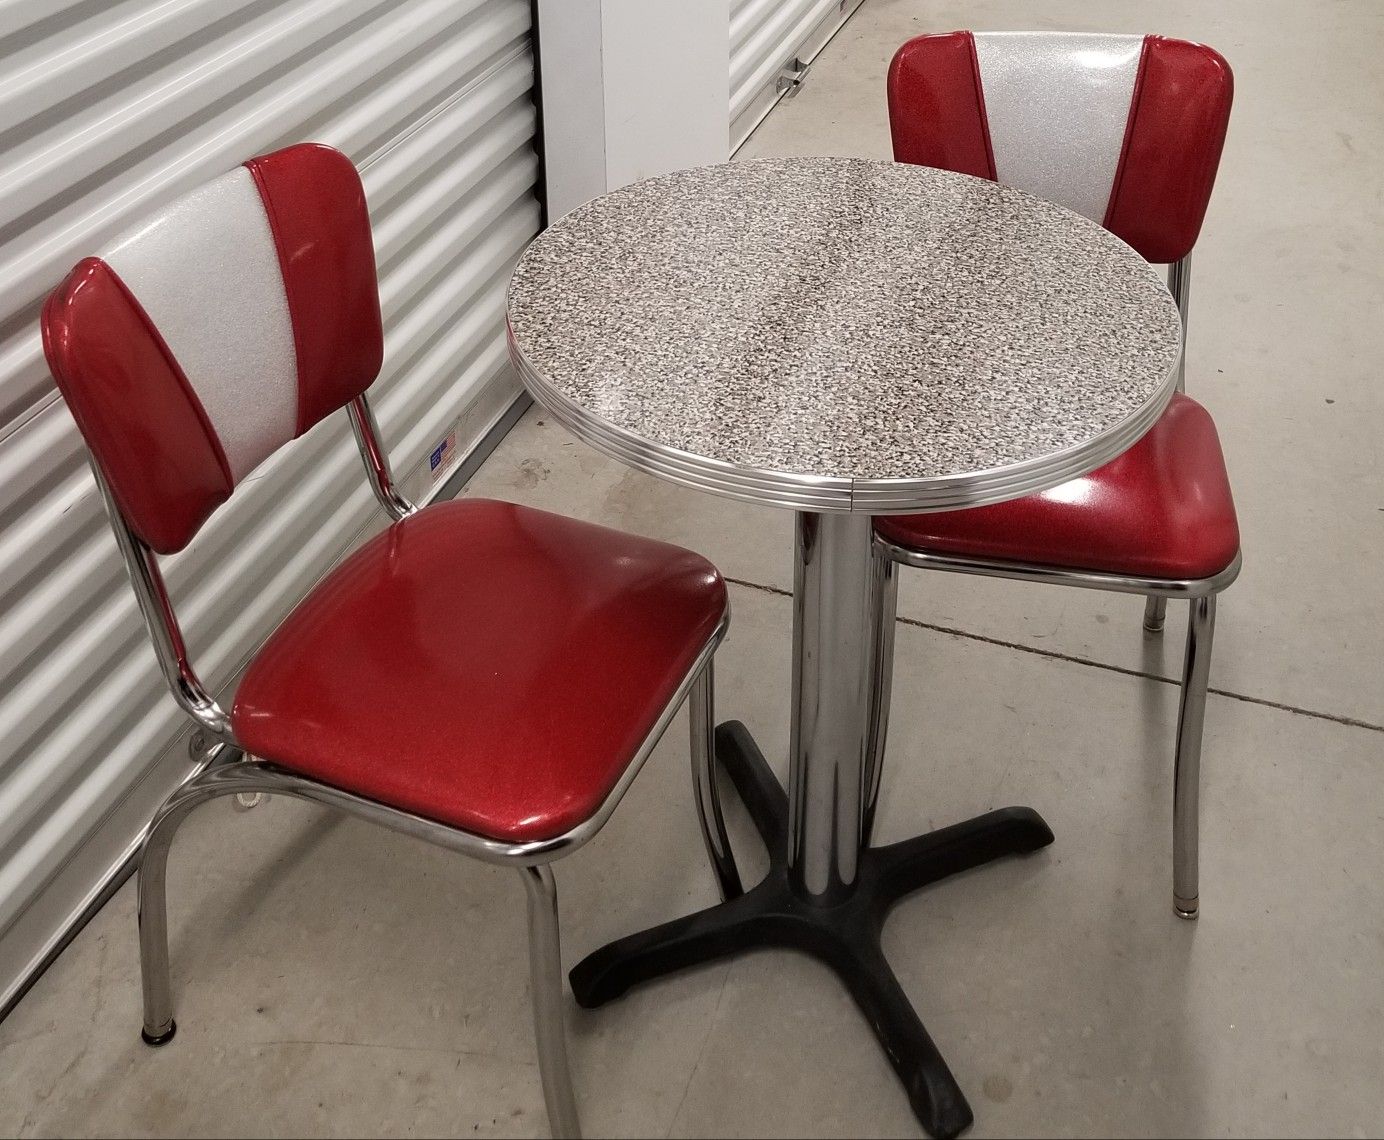 Adorable 1950s style chrome bistro table and chairs